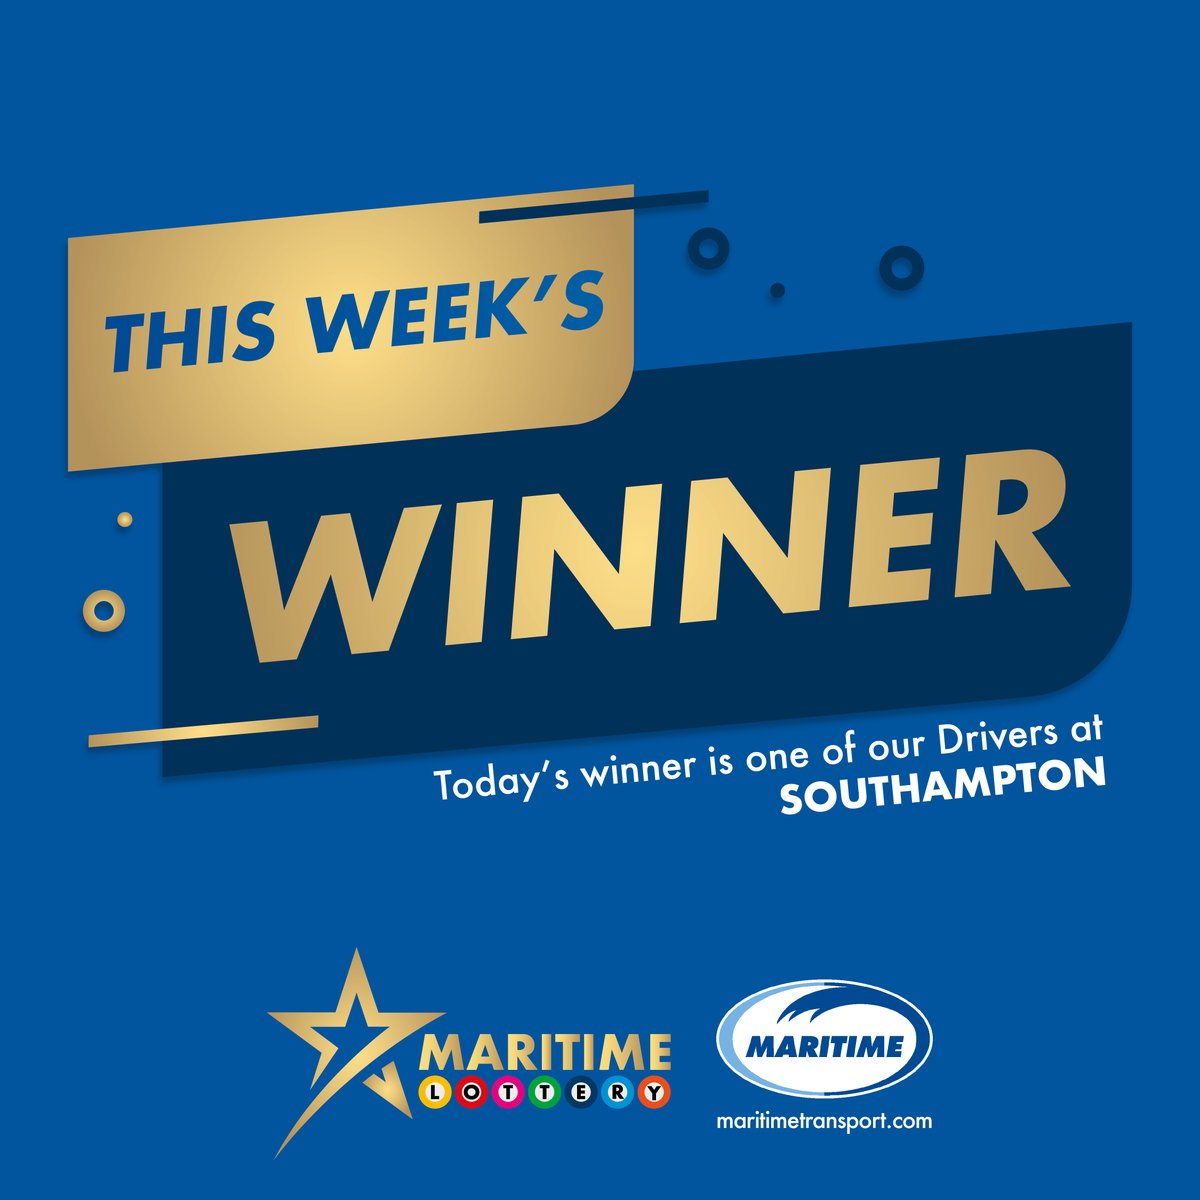 Congratulations to one of our Drivers, based at Southampton, who has just been announced as this week’s winner of our Maritime Lottery, taking home £1,000! Employees head to iWave to find out more. #mtllottery #maritimetransport